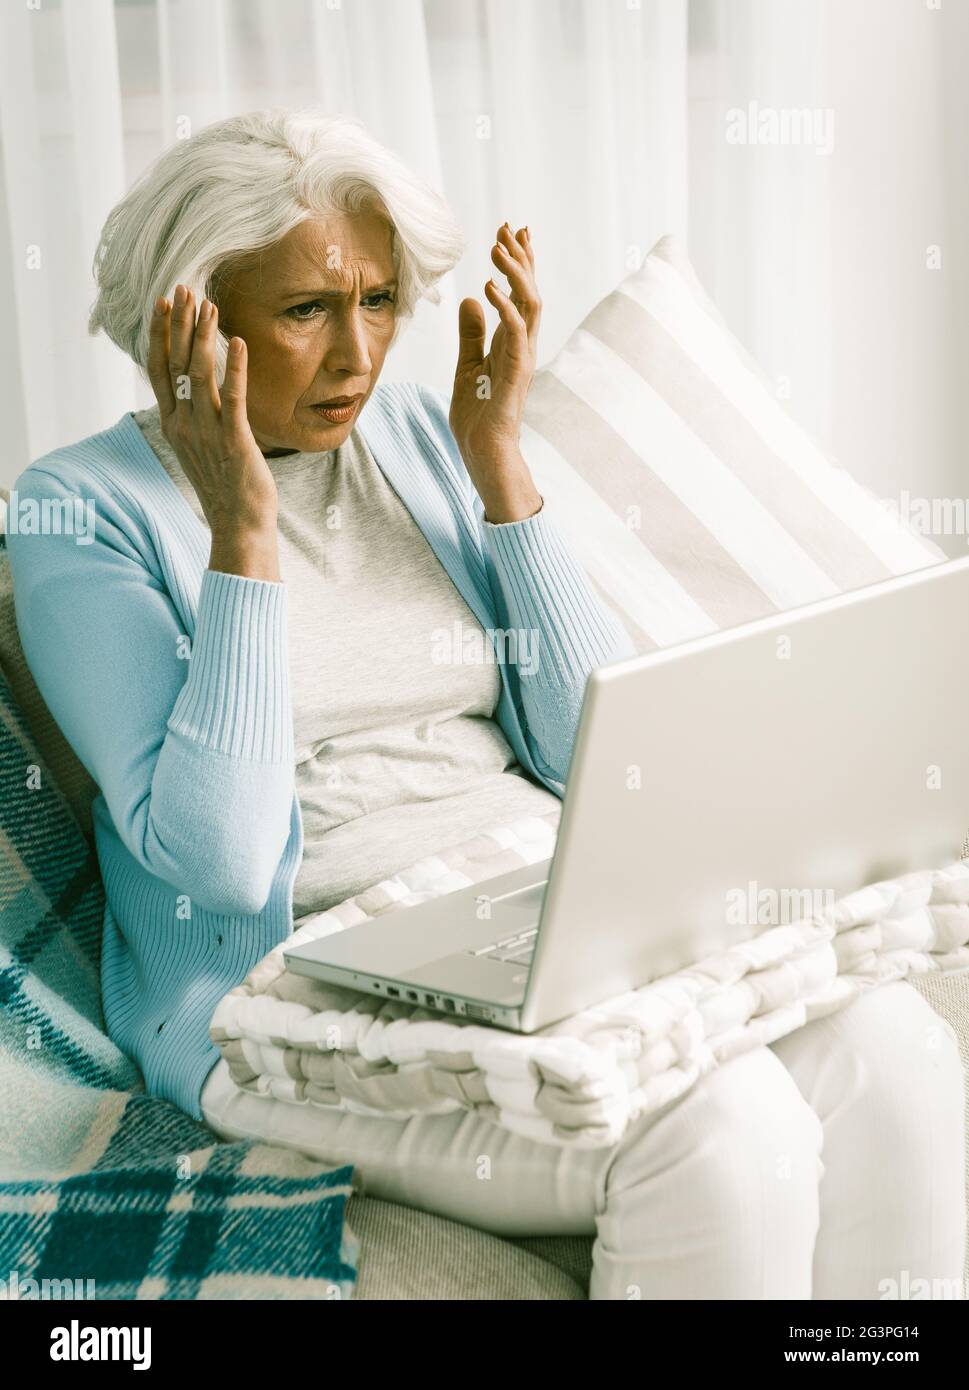 Frustrated Senior Woman Having Difficulty Using Laptop Computer Stock Photo